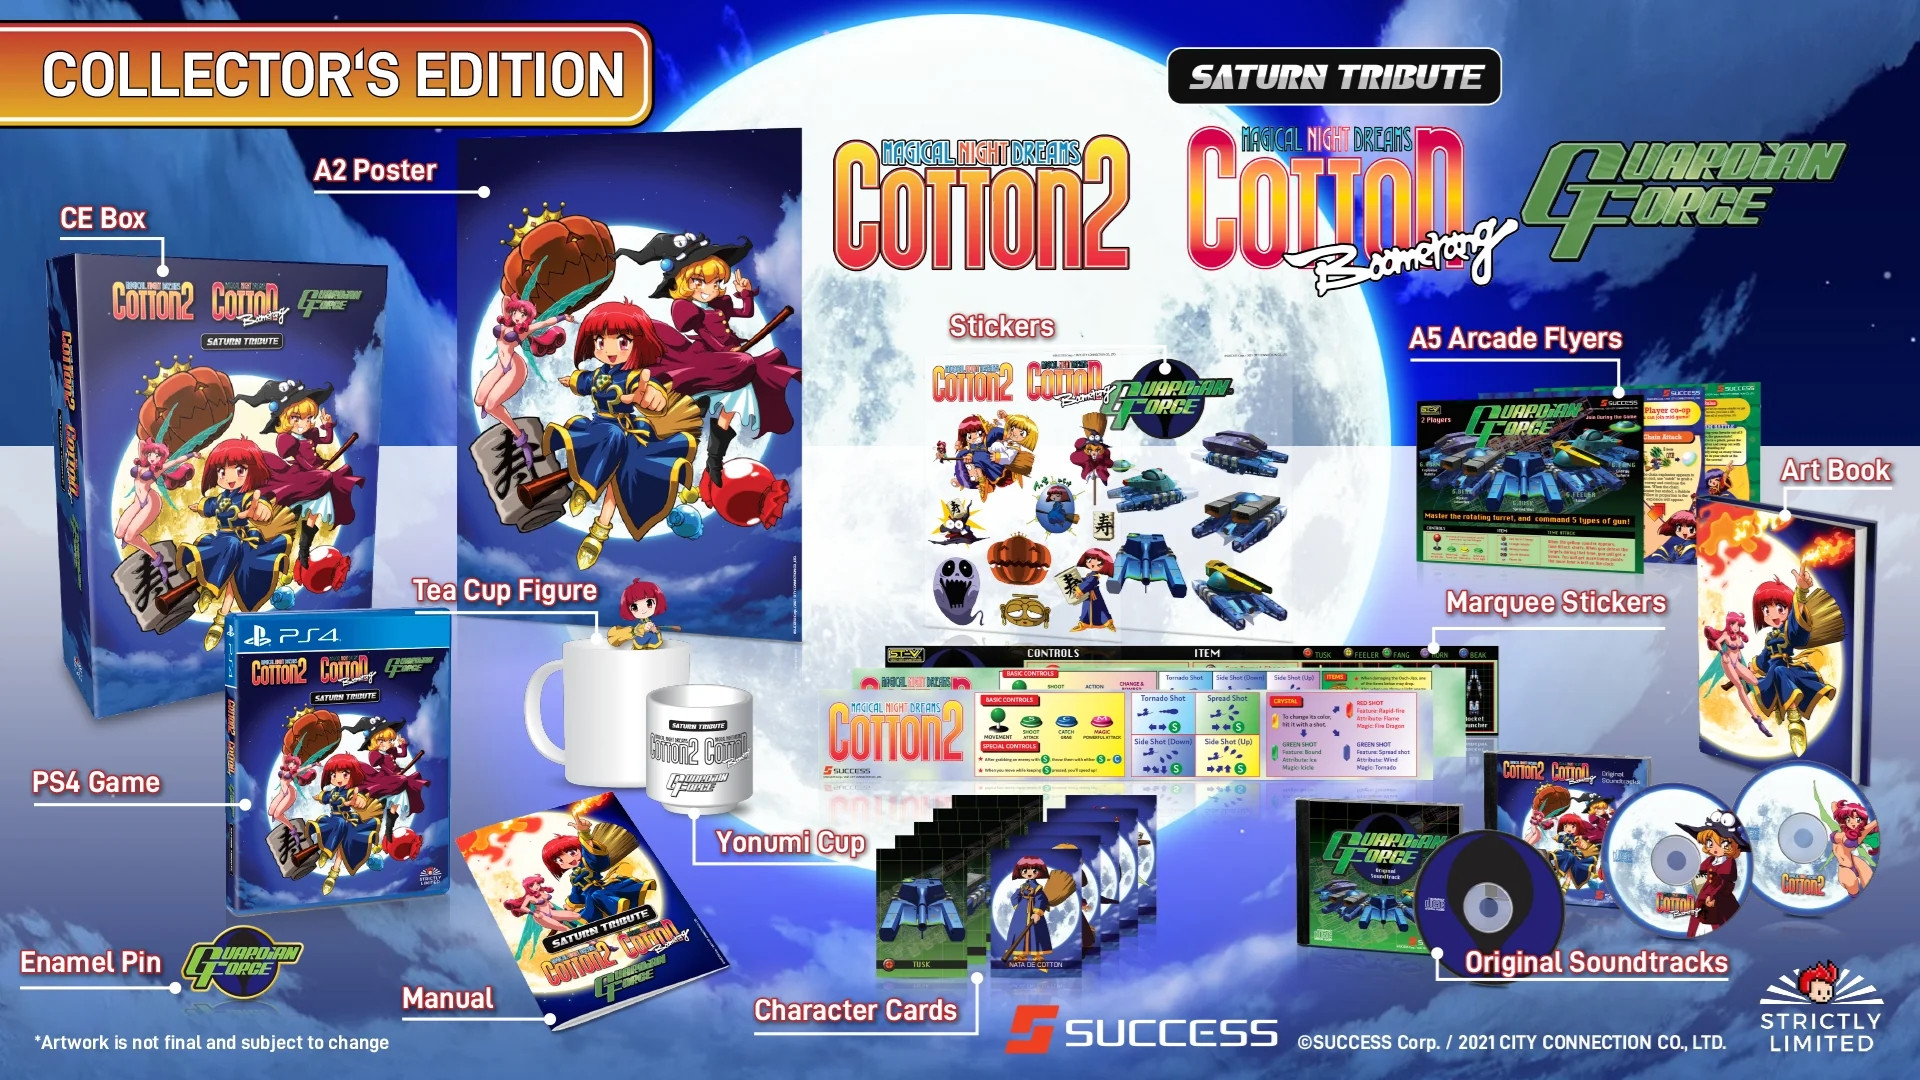 Cotton guardian force saturn tribute Collector's edition / Strictly limited games / PS4 / 1000 copies